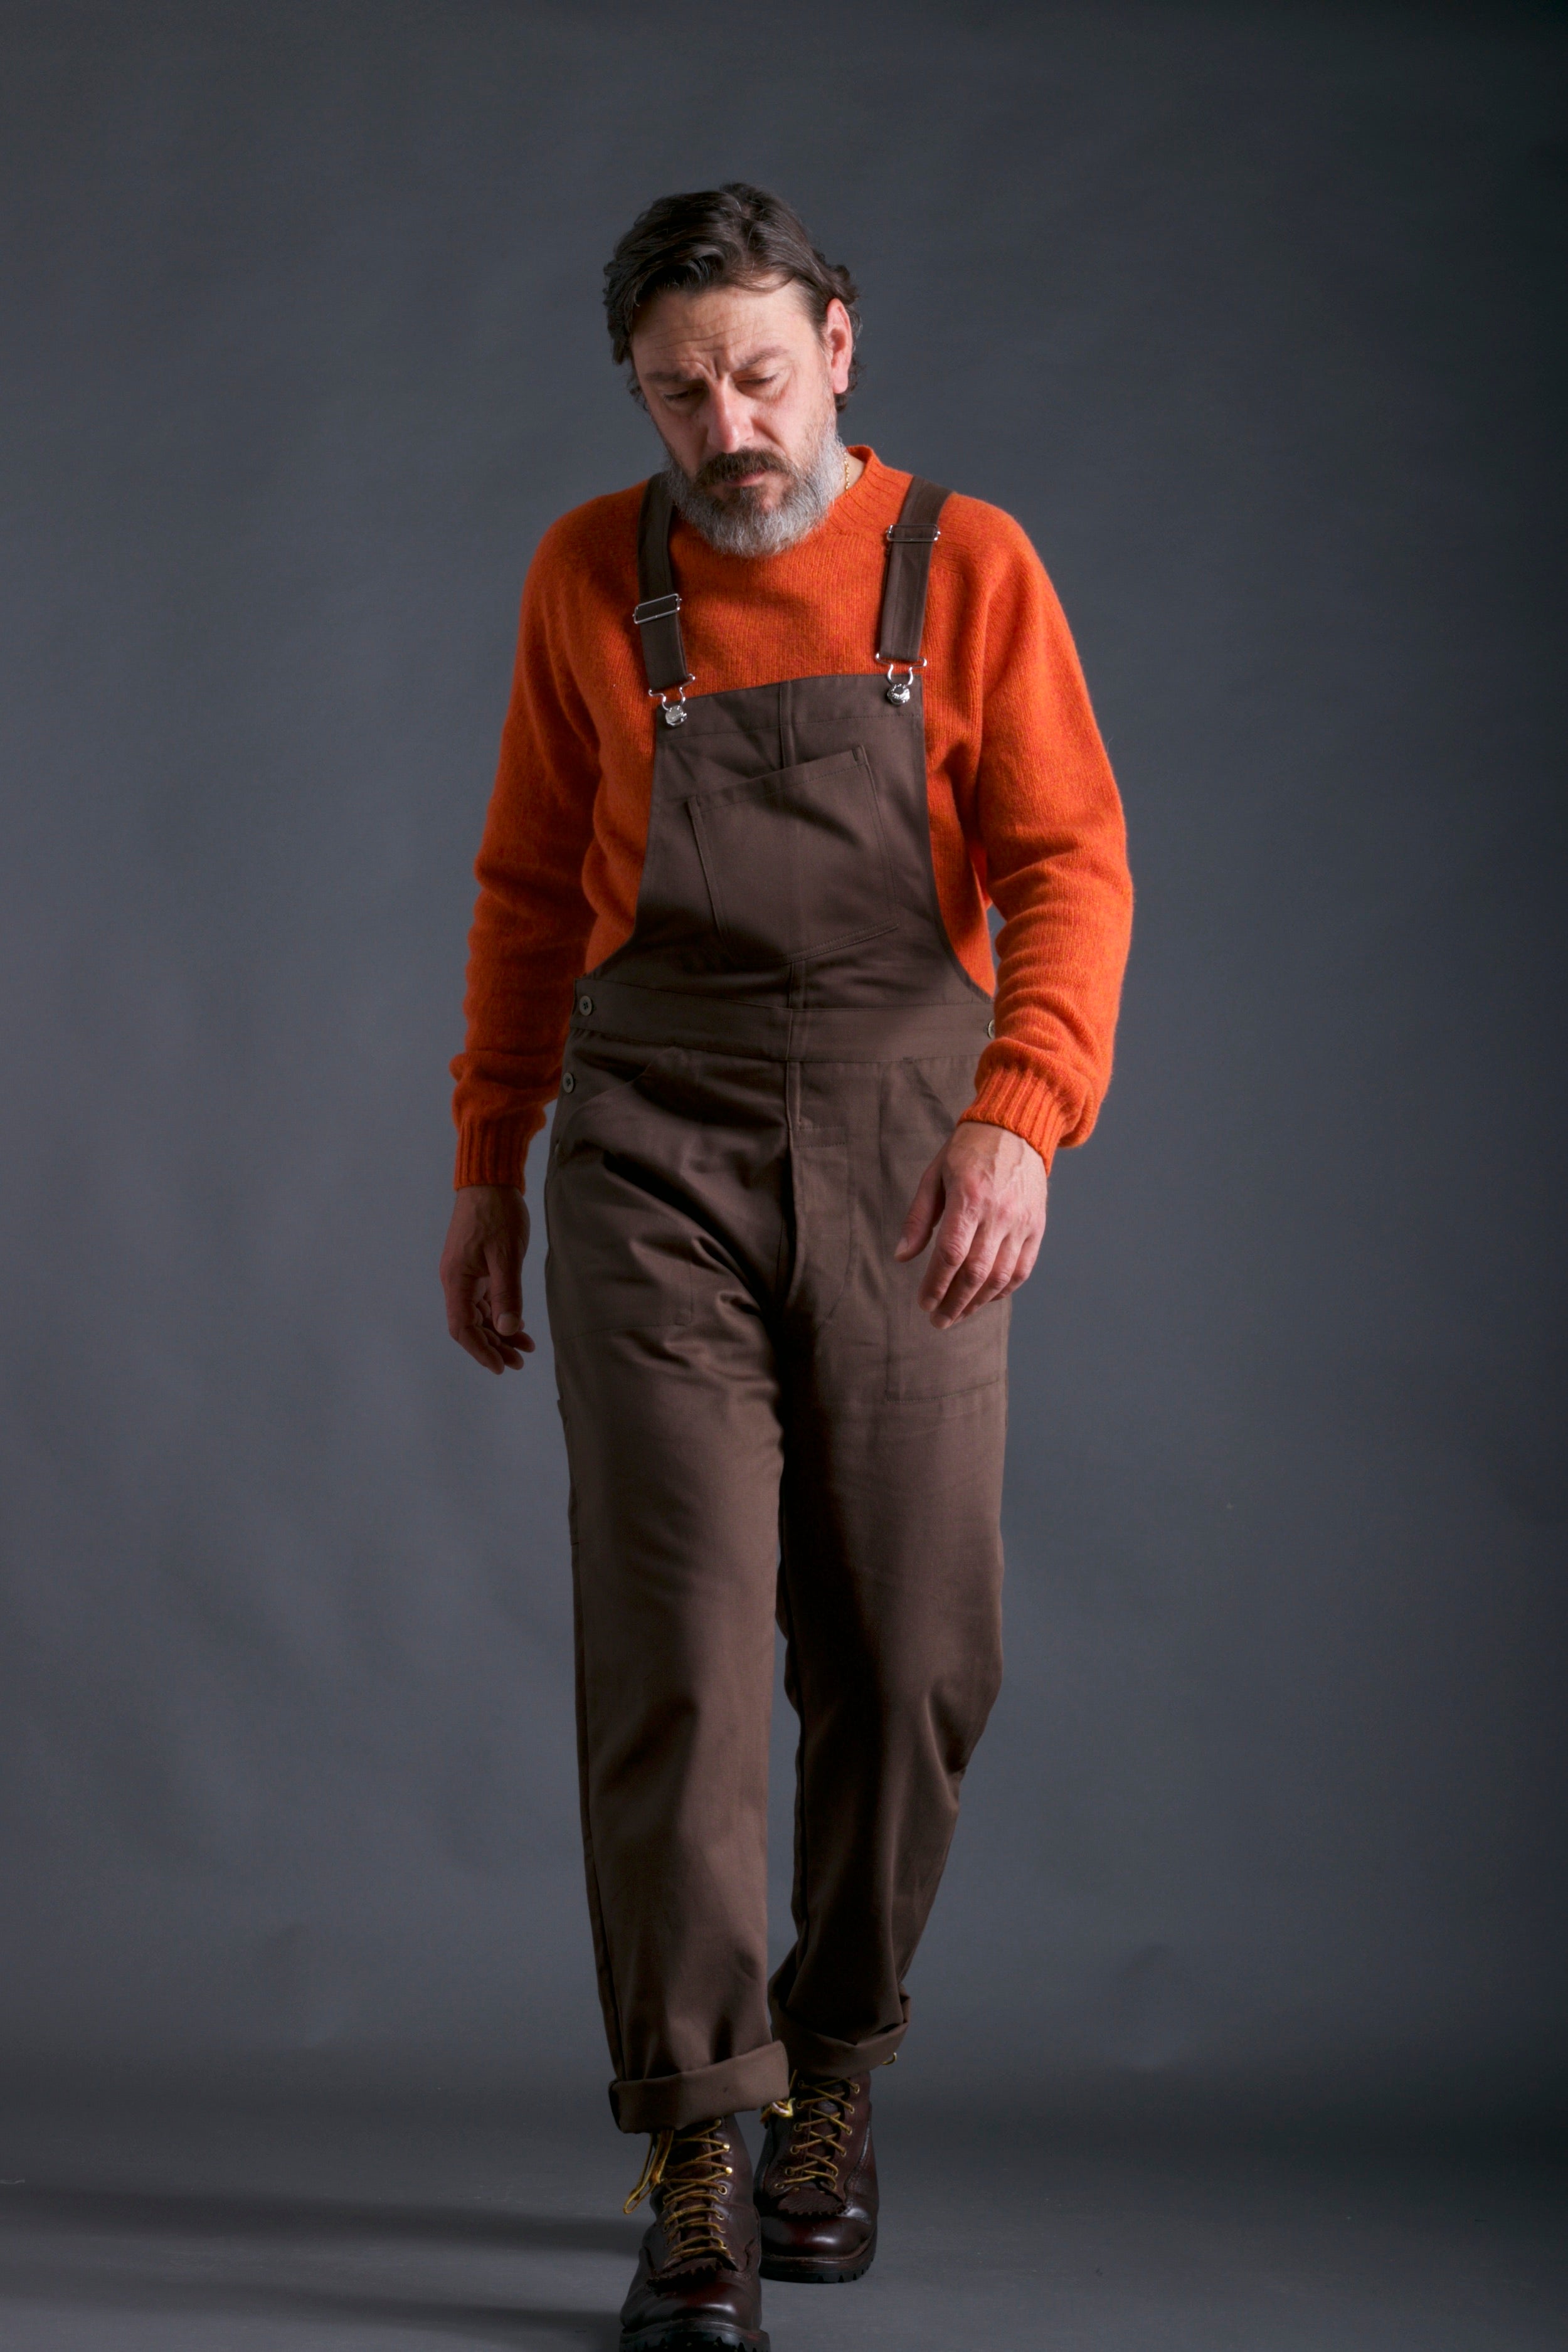 Man wears Carrier Company Men's full-length Dungarees in Olive with Shetland Lambswool Jumper in Tangerine